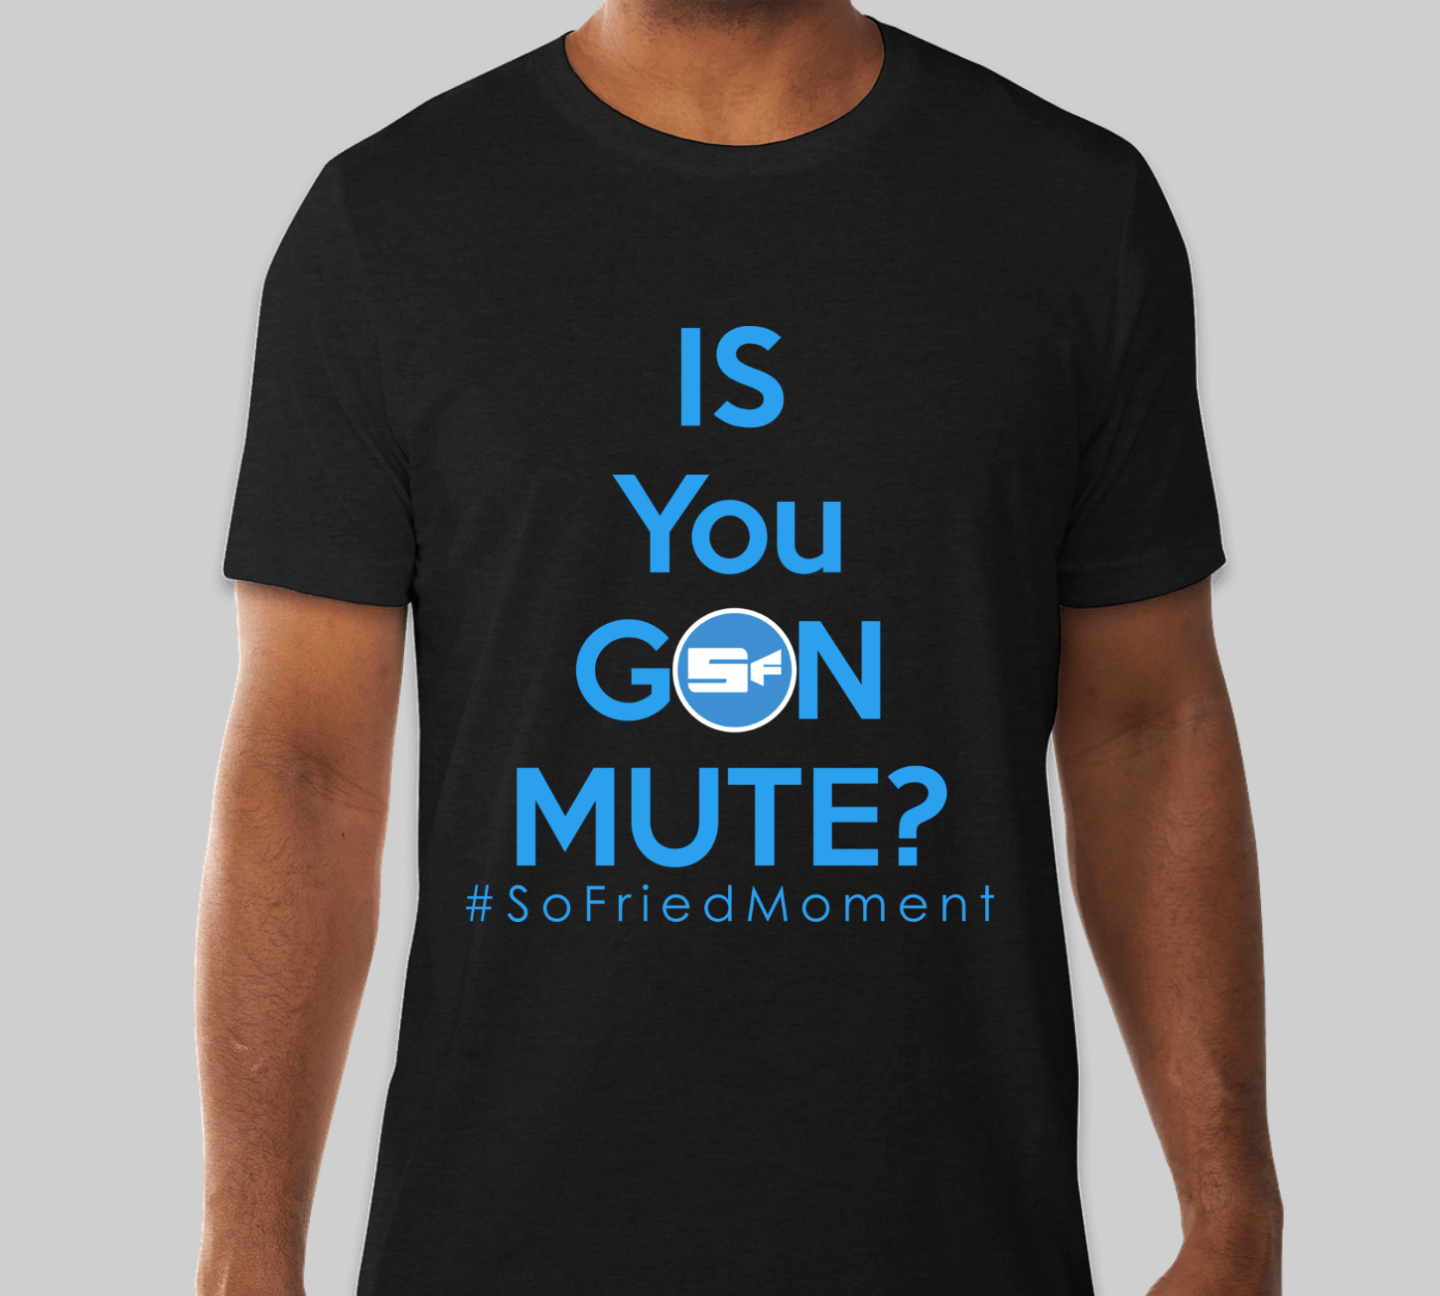 2021 – SF2021 “IS YOU GON MUTE?” Commemorative T-Shirt